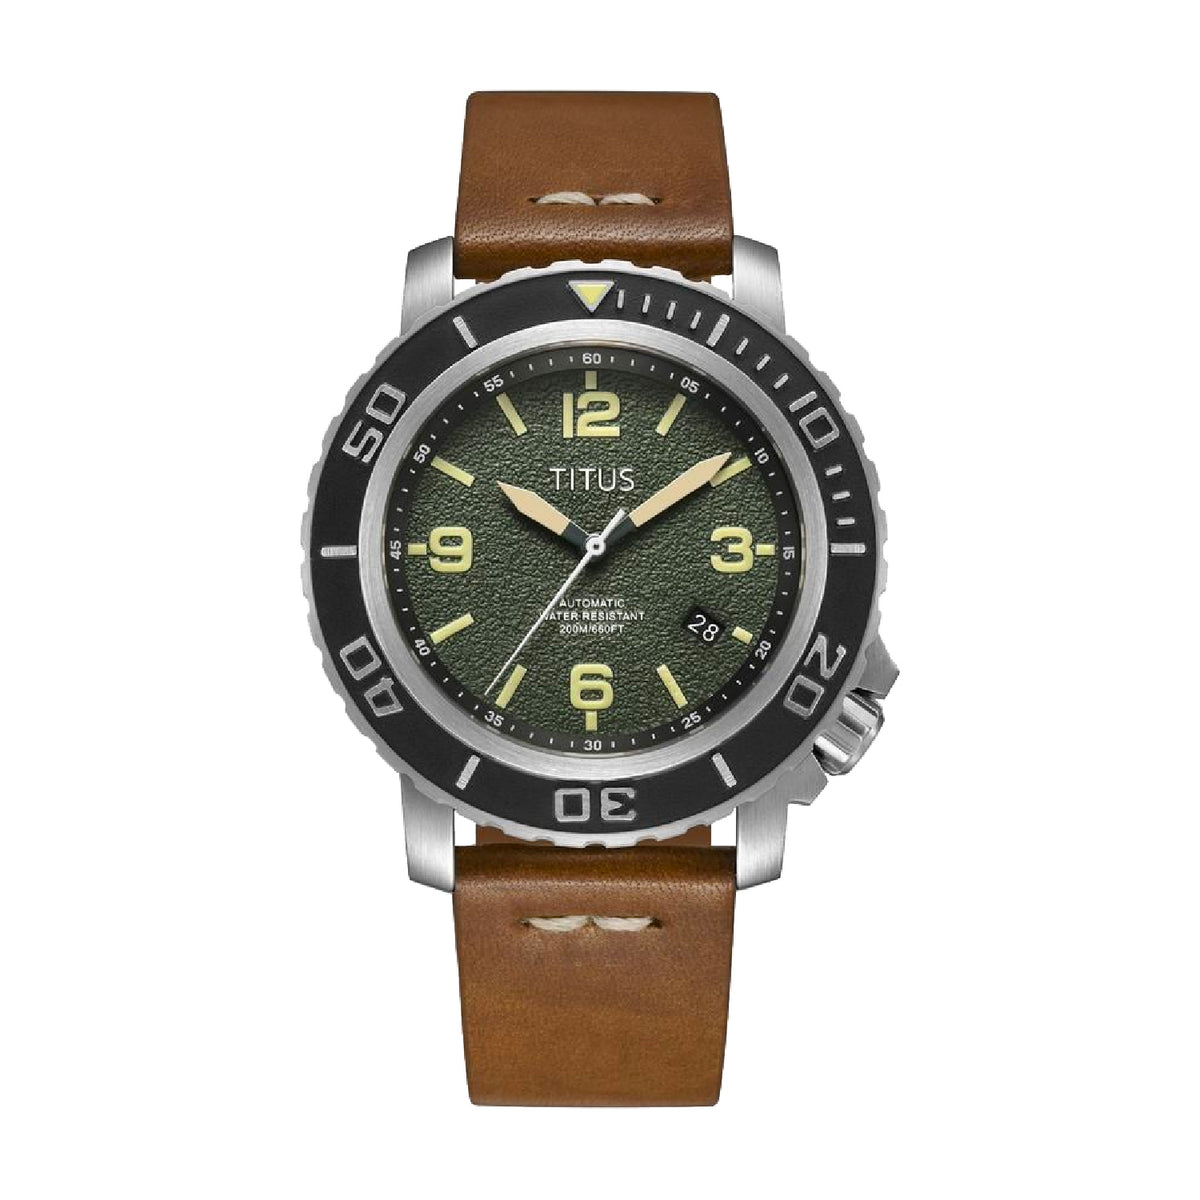 The Cape 3 Hands Date Mechanical Leather Men Watch W06-03227-004